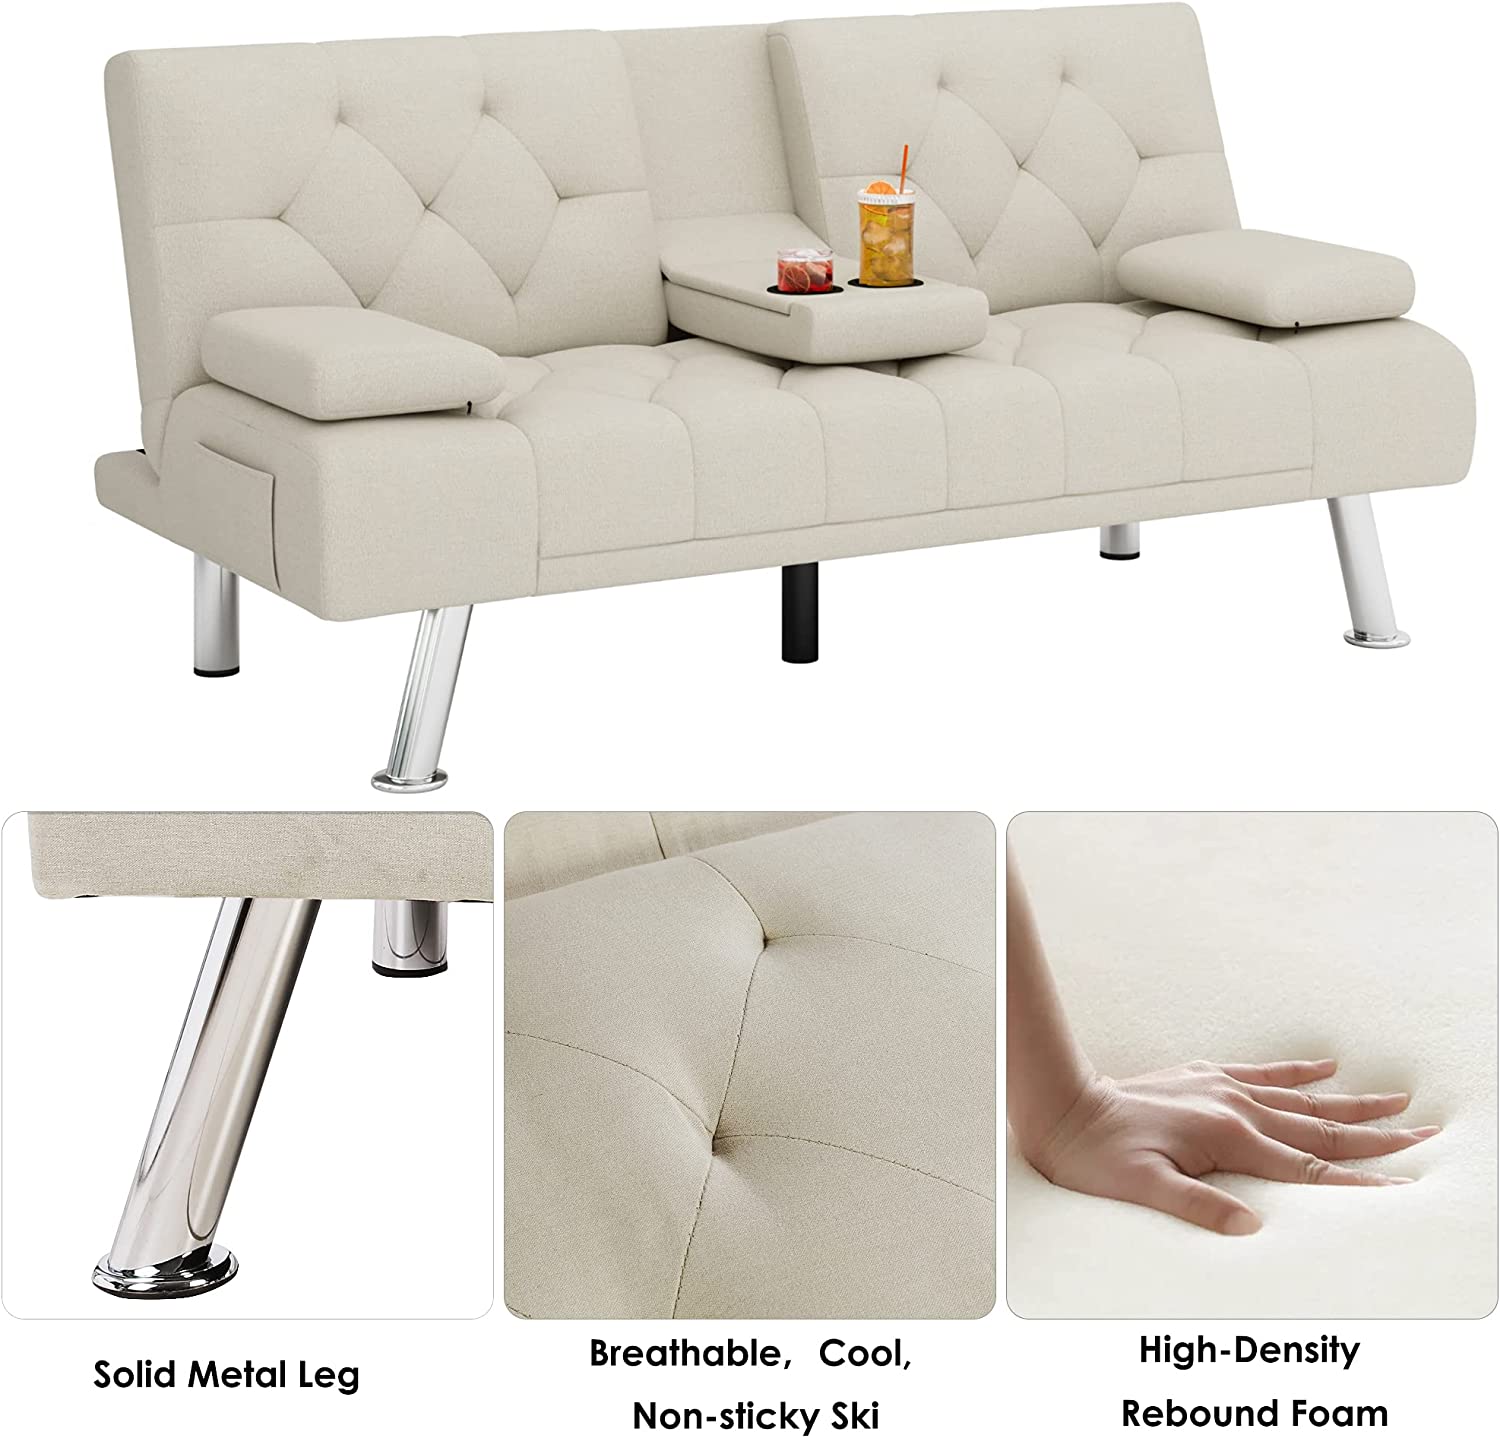 Homfa Upholstered Sofa Bed Couch, Convertible Futon Sleeper Sofa with Removable Armrests and 2 Cup Holders, Cream White - image 3 of 8